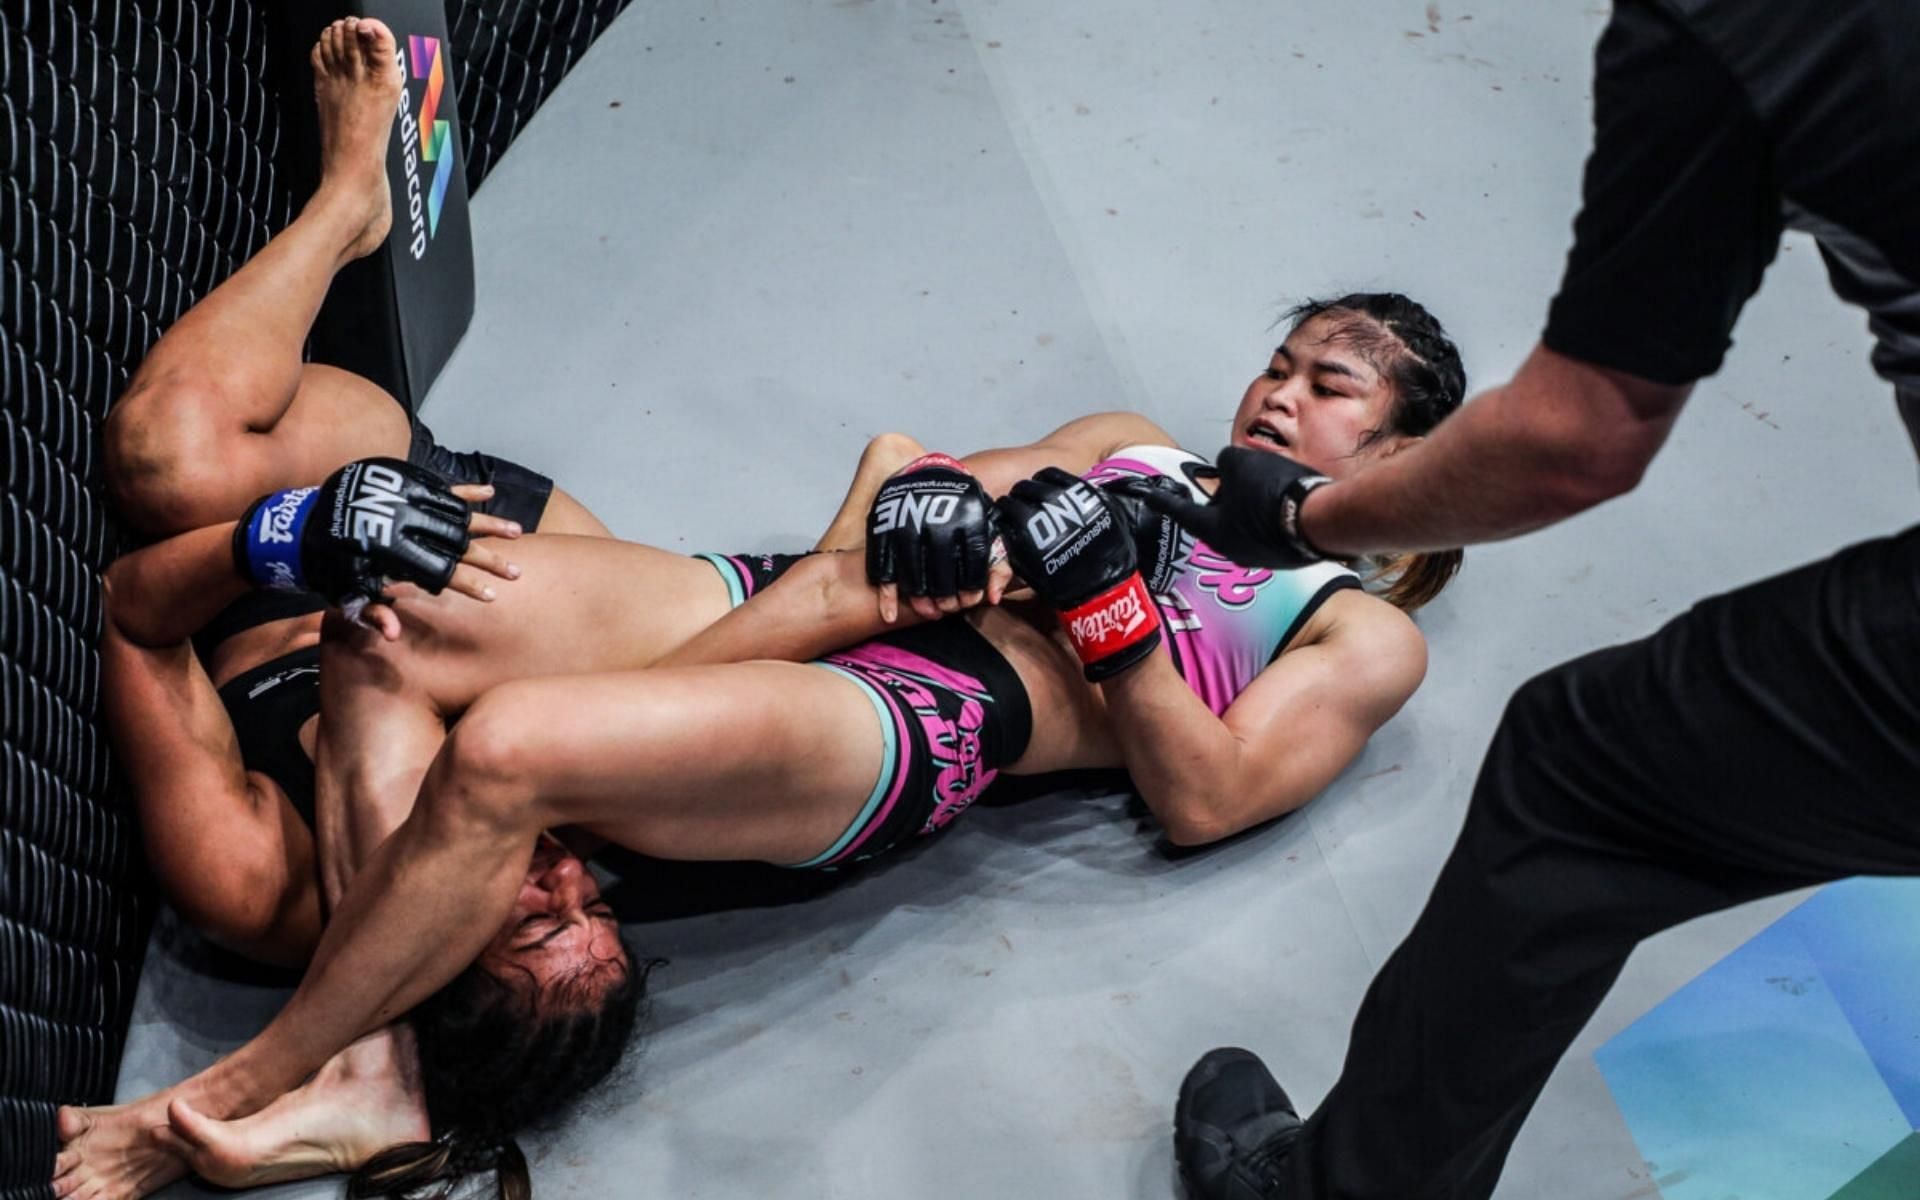 ONE Championship atomweight and Muay Thai phenom Stamp Fairtex shocked everyone when she submitted a gifted grappler in Ritu Phogat in December of 2021. (Image courtesy of ONE Championship)